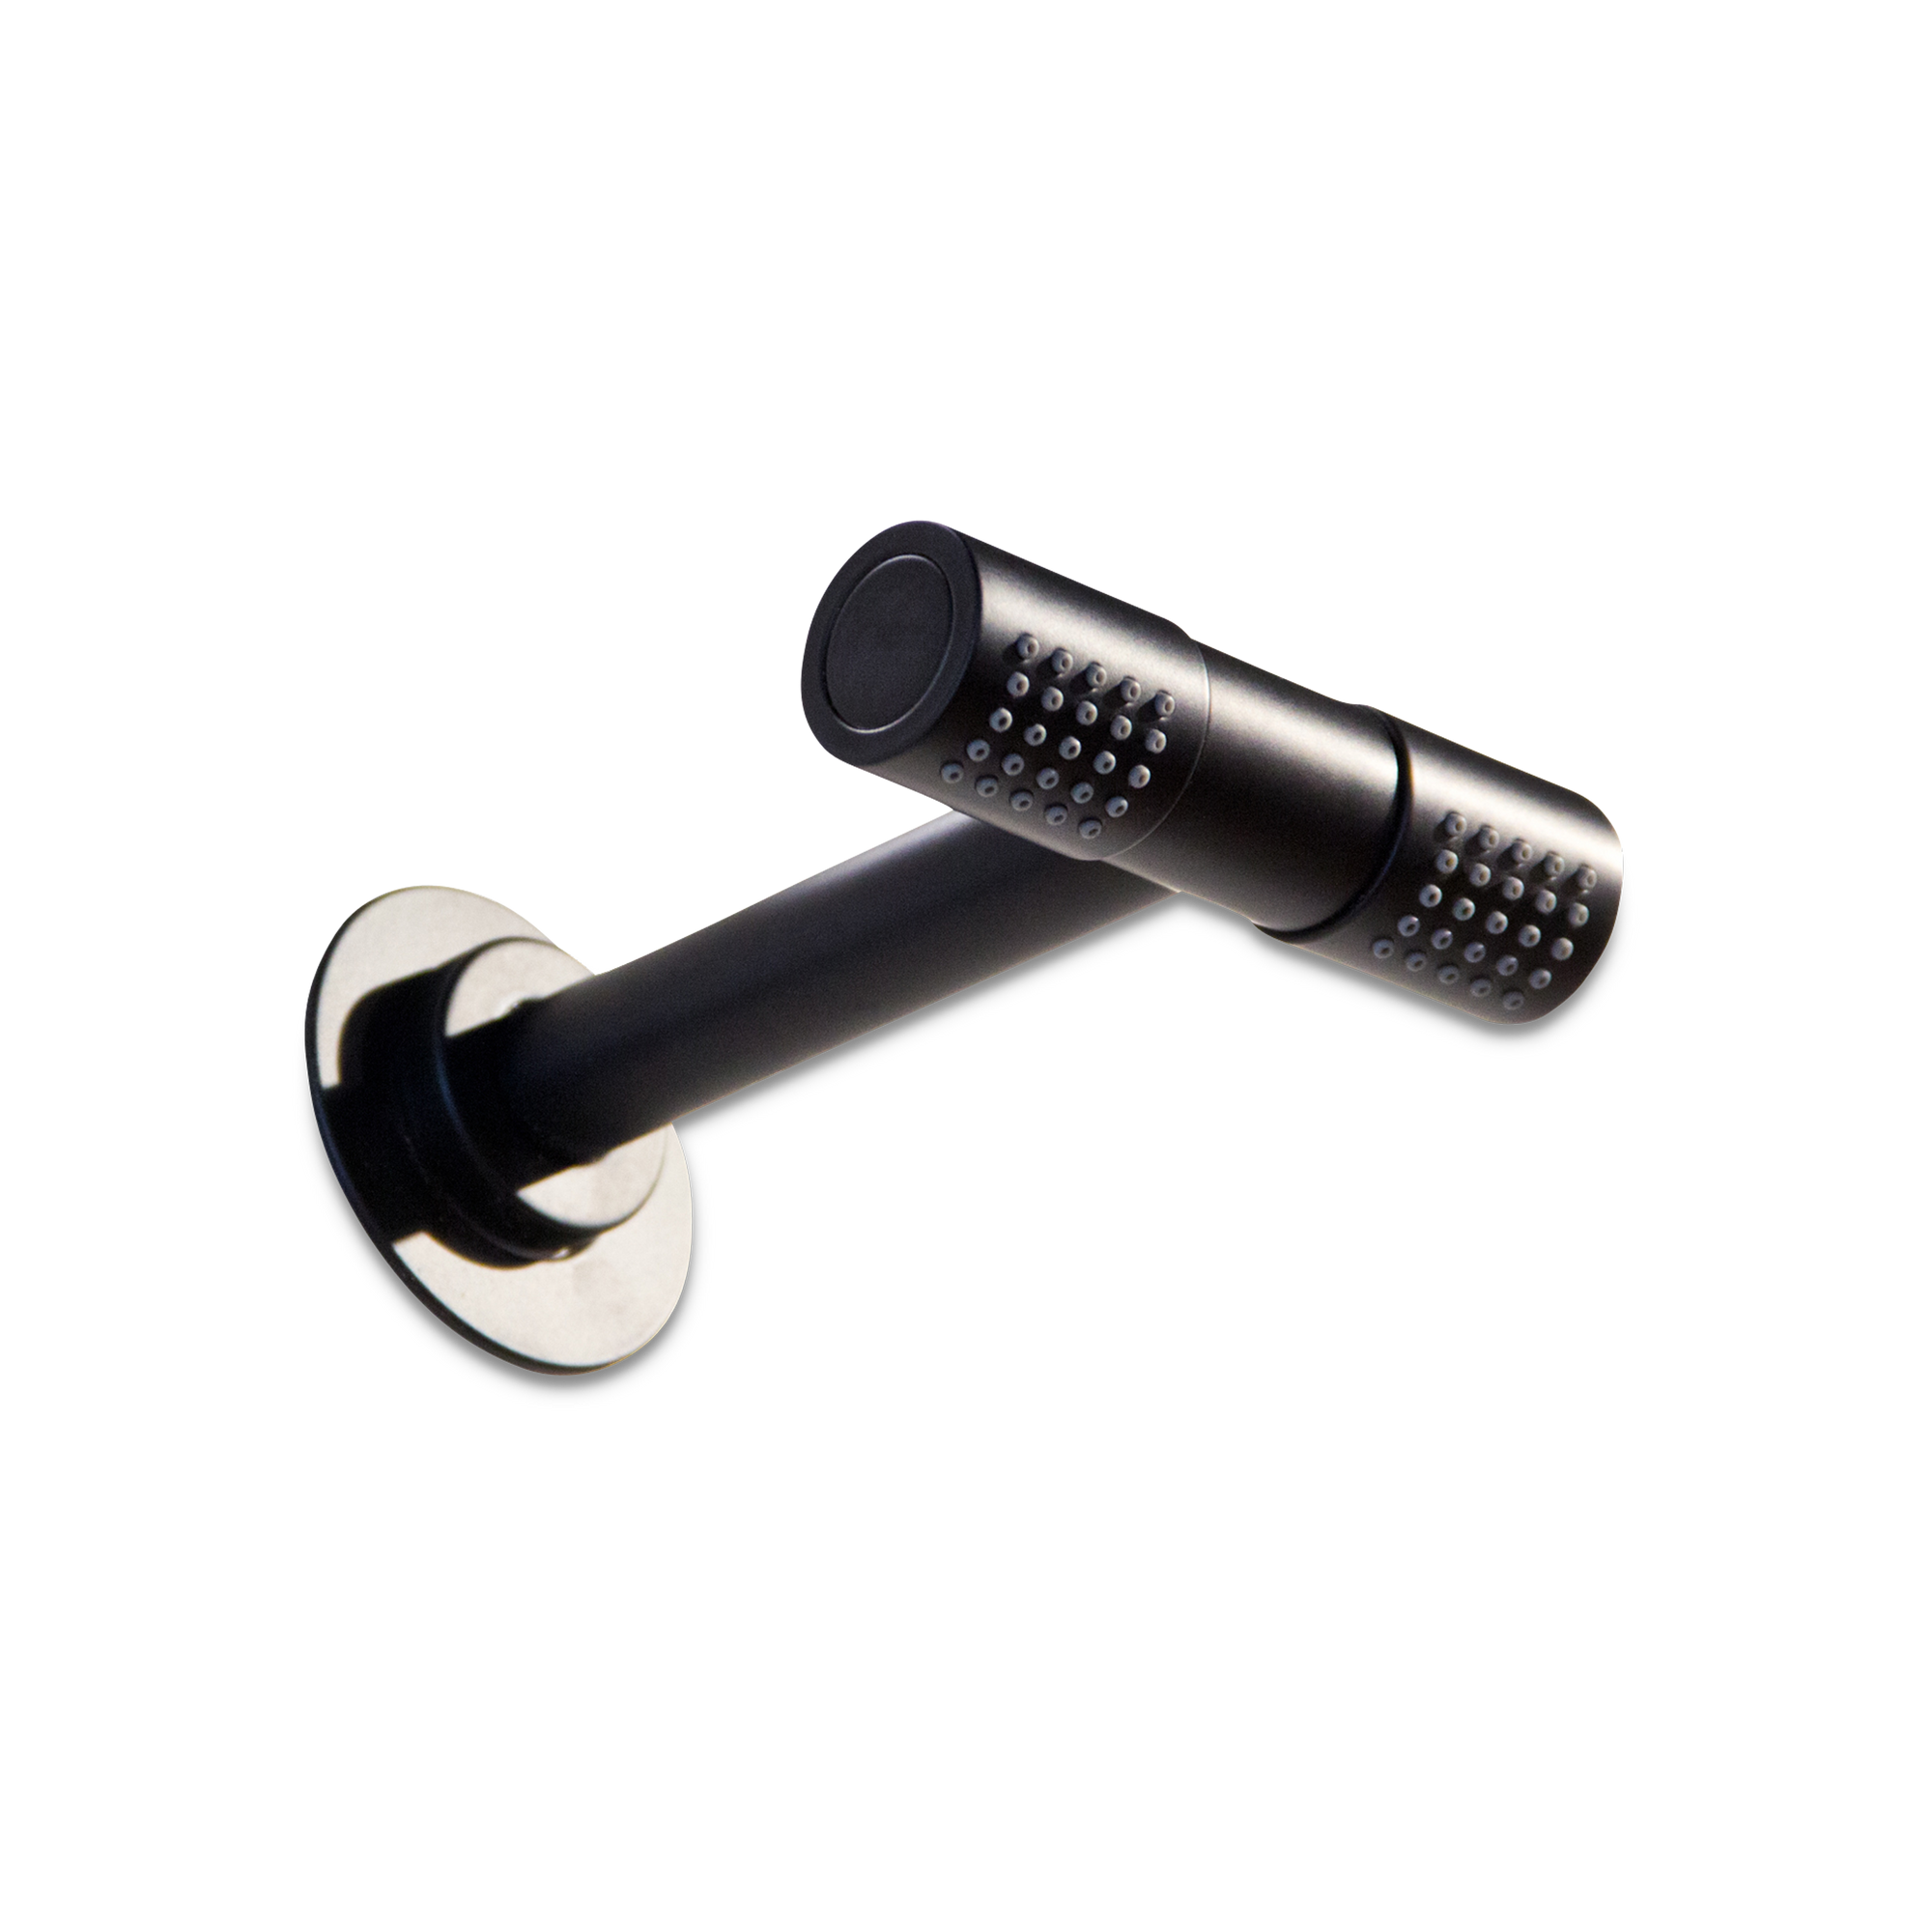 The 080D shower head is a wall-mounted masterpiece, featuring dual spray and a modern flange.